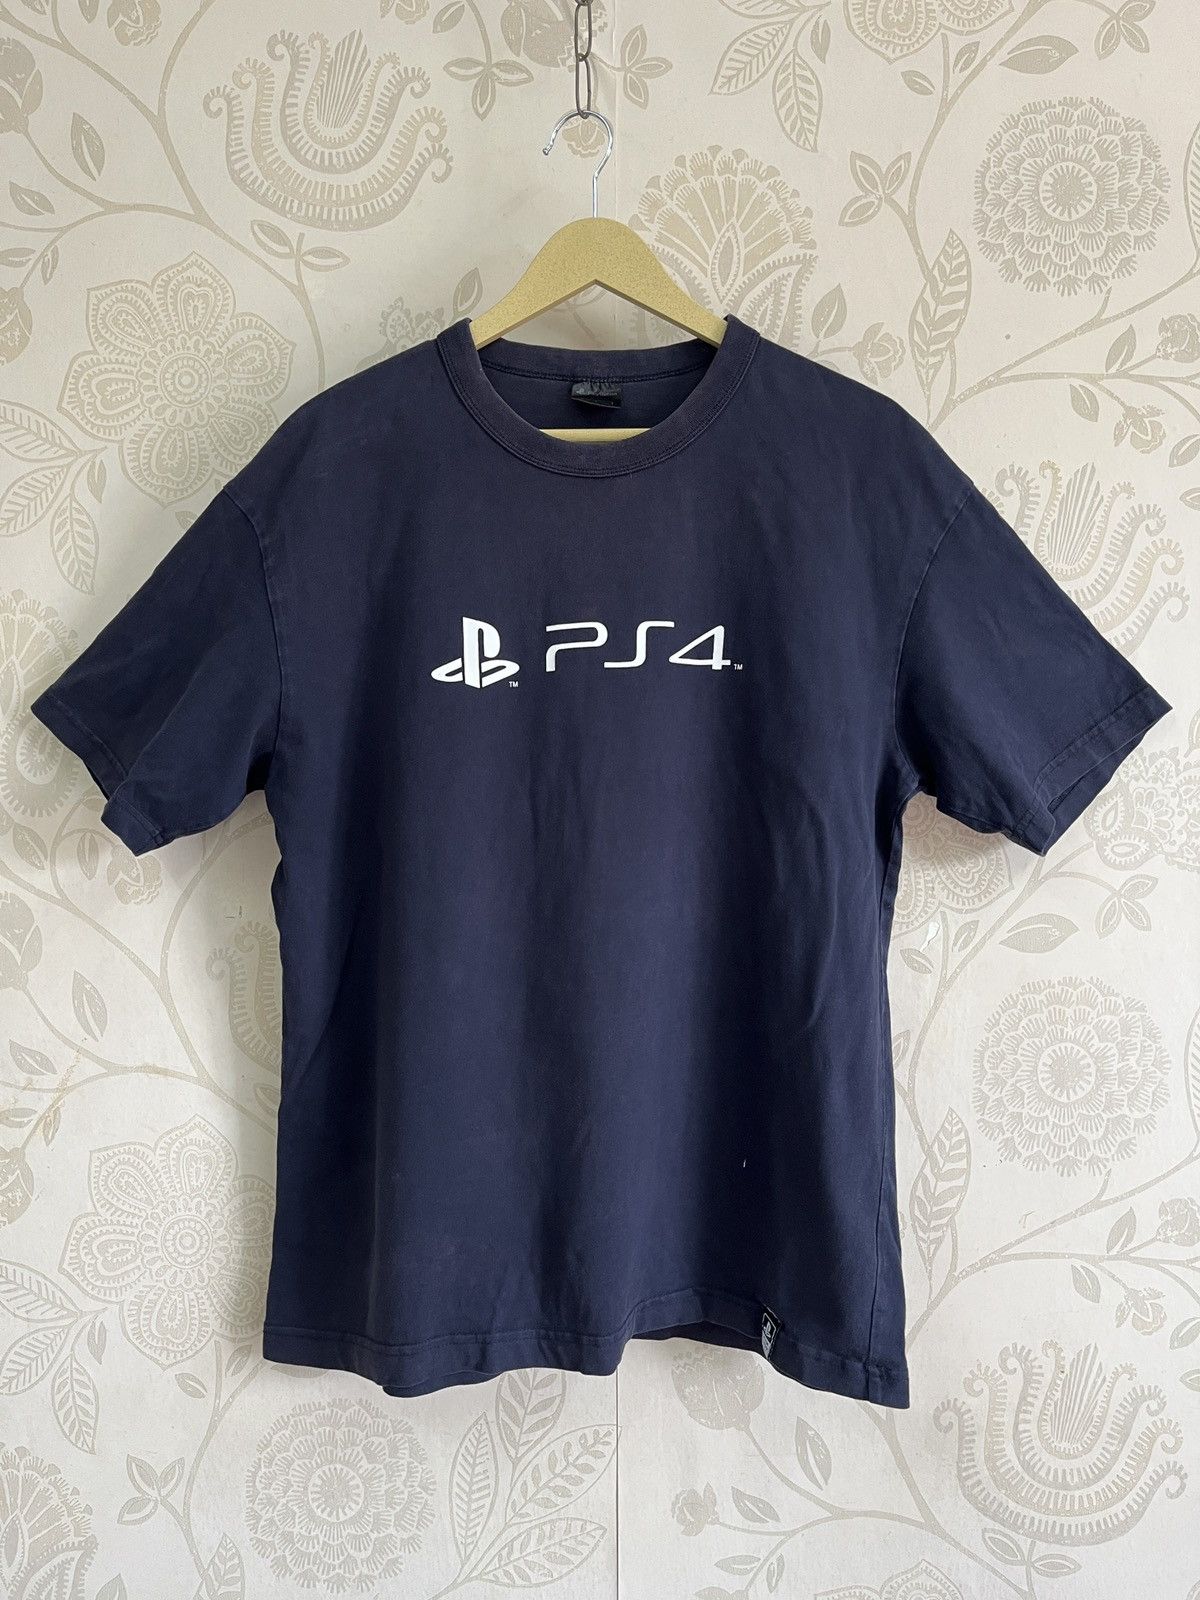 Playstation PS4 Promo TShirt Japan Official Licensed Product - 1